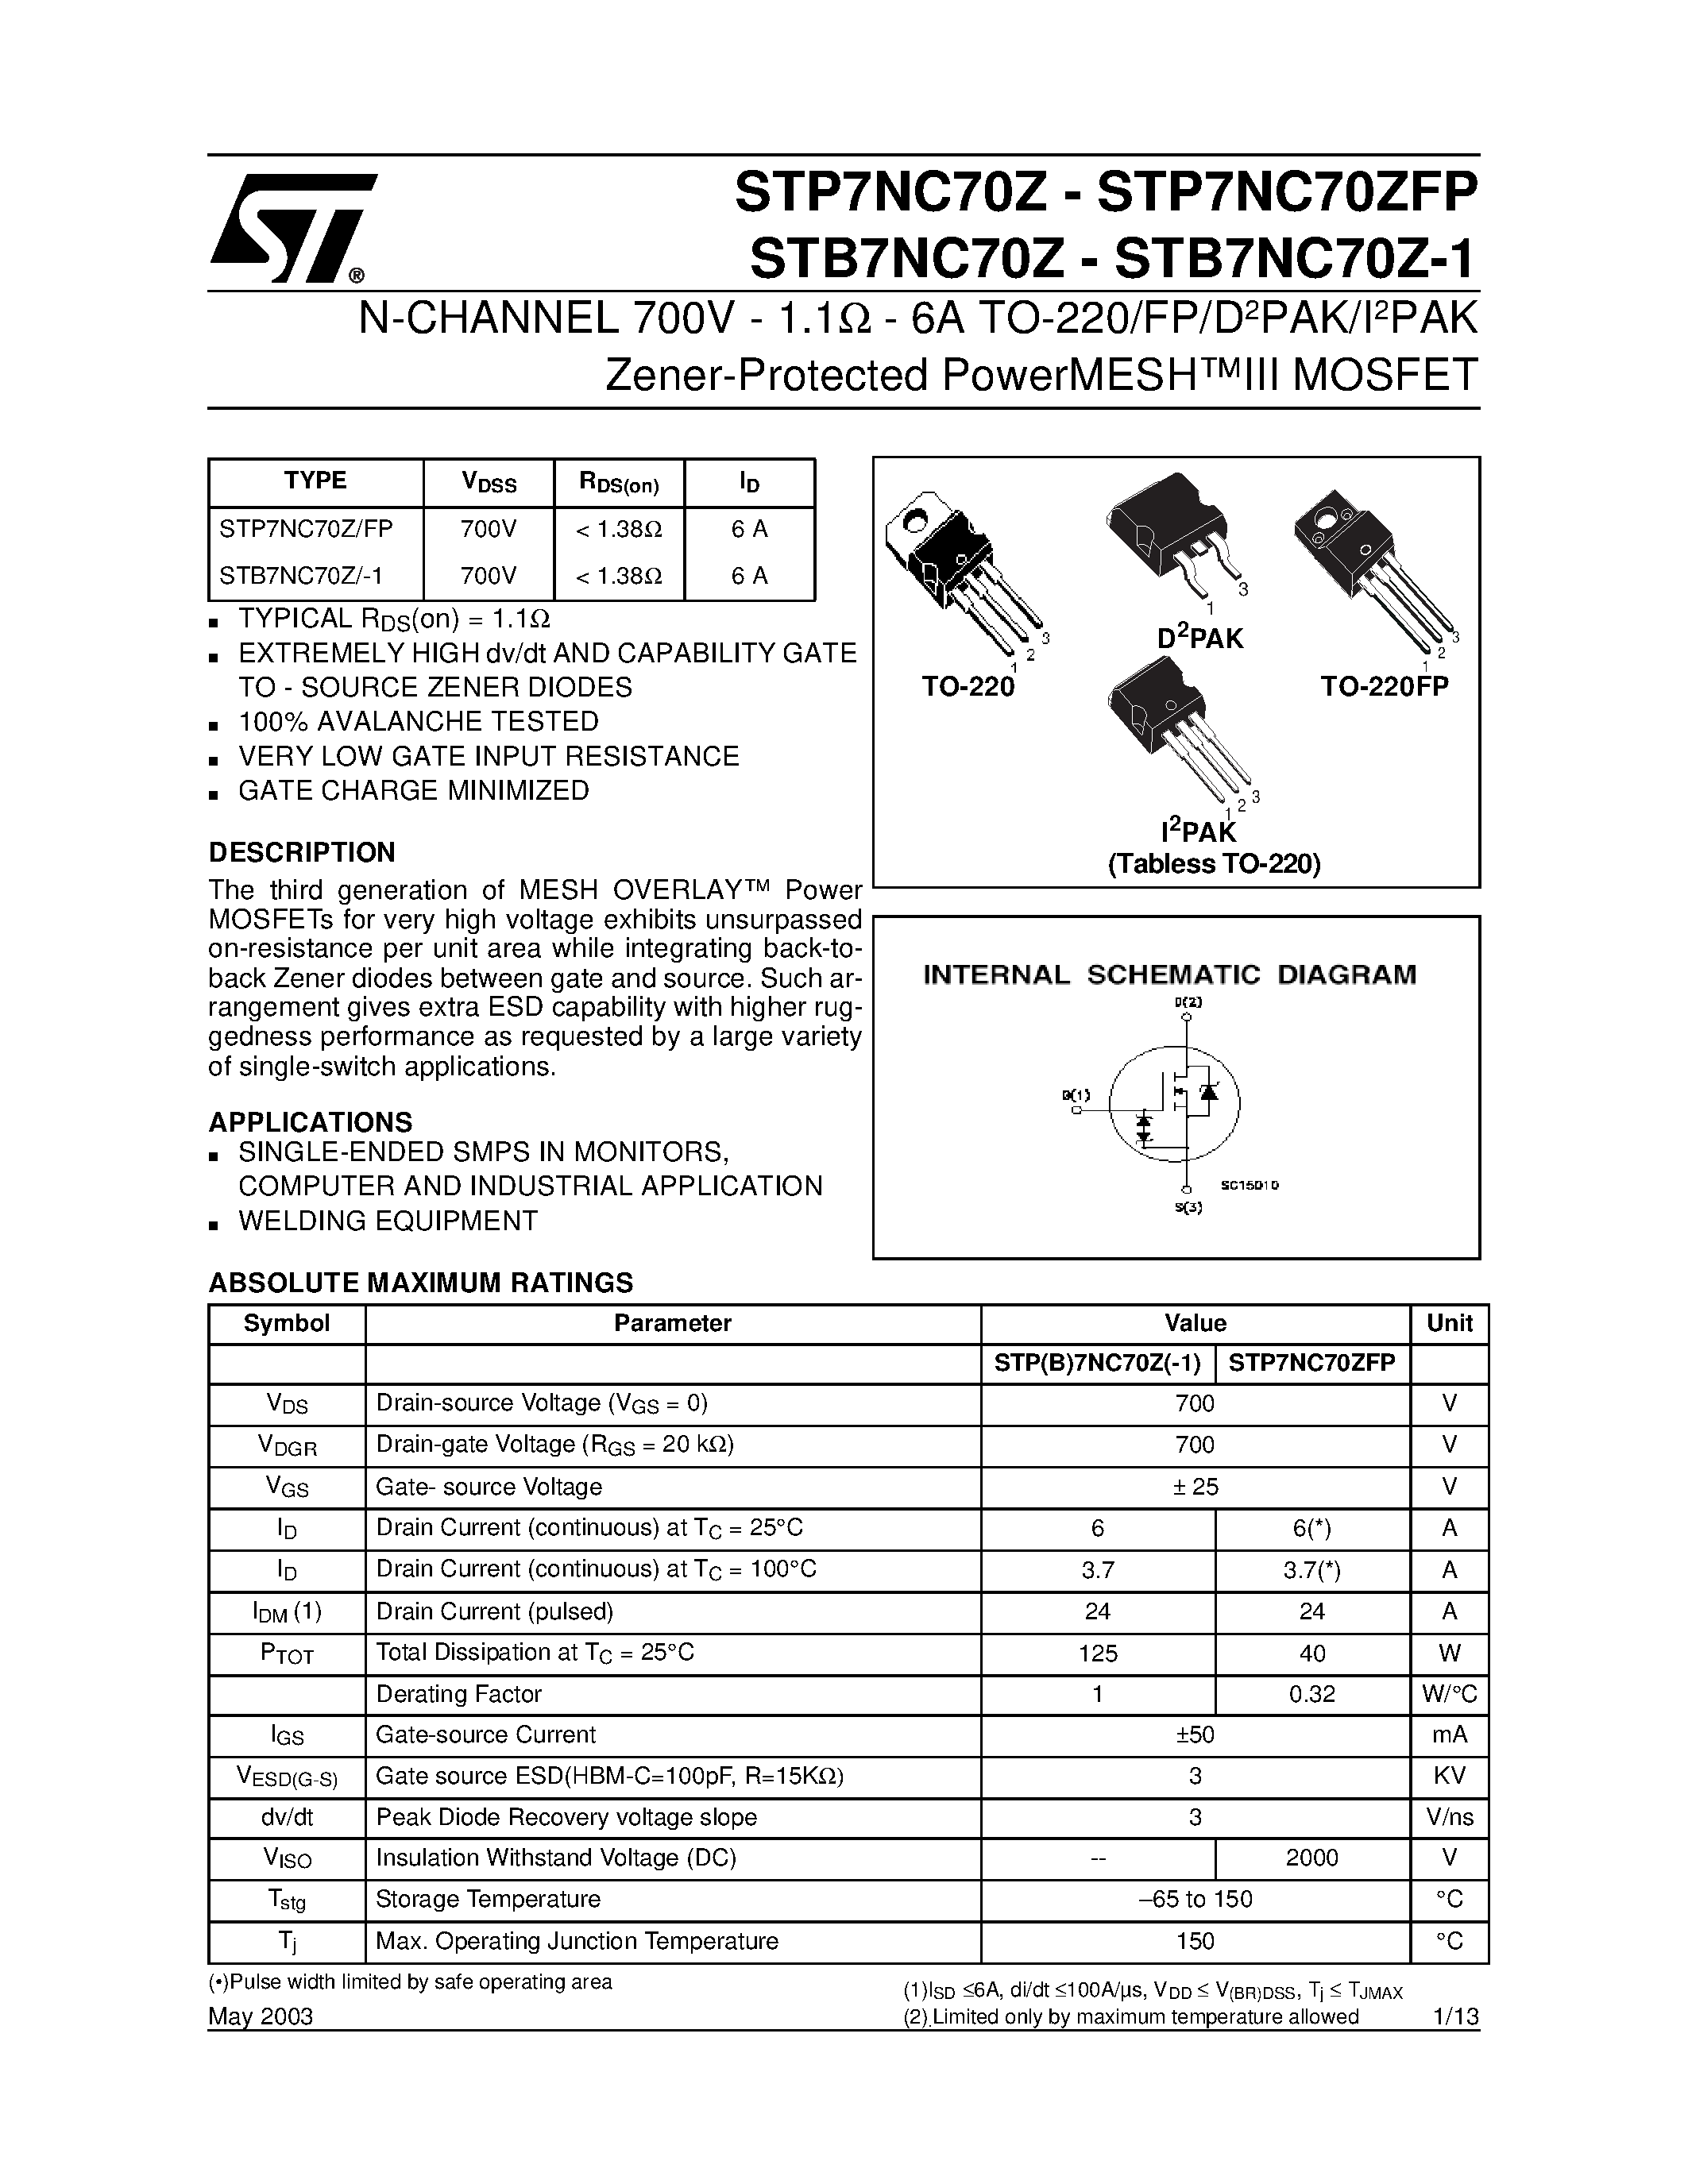 Даташит STB7NC70Z - N-CHANNEL MOSFET страница 1